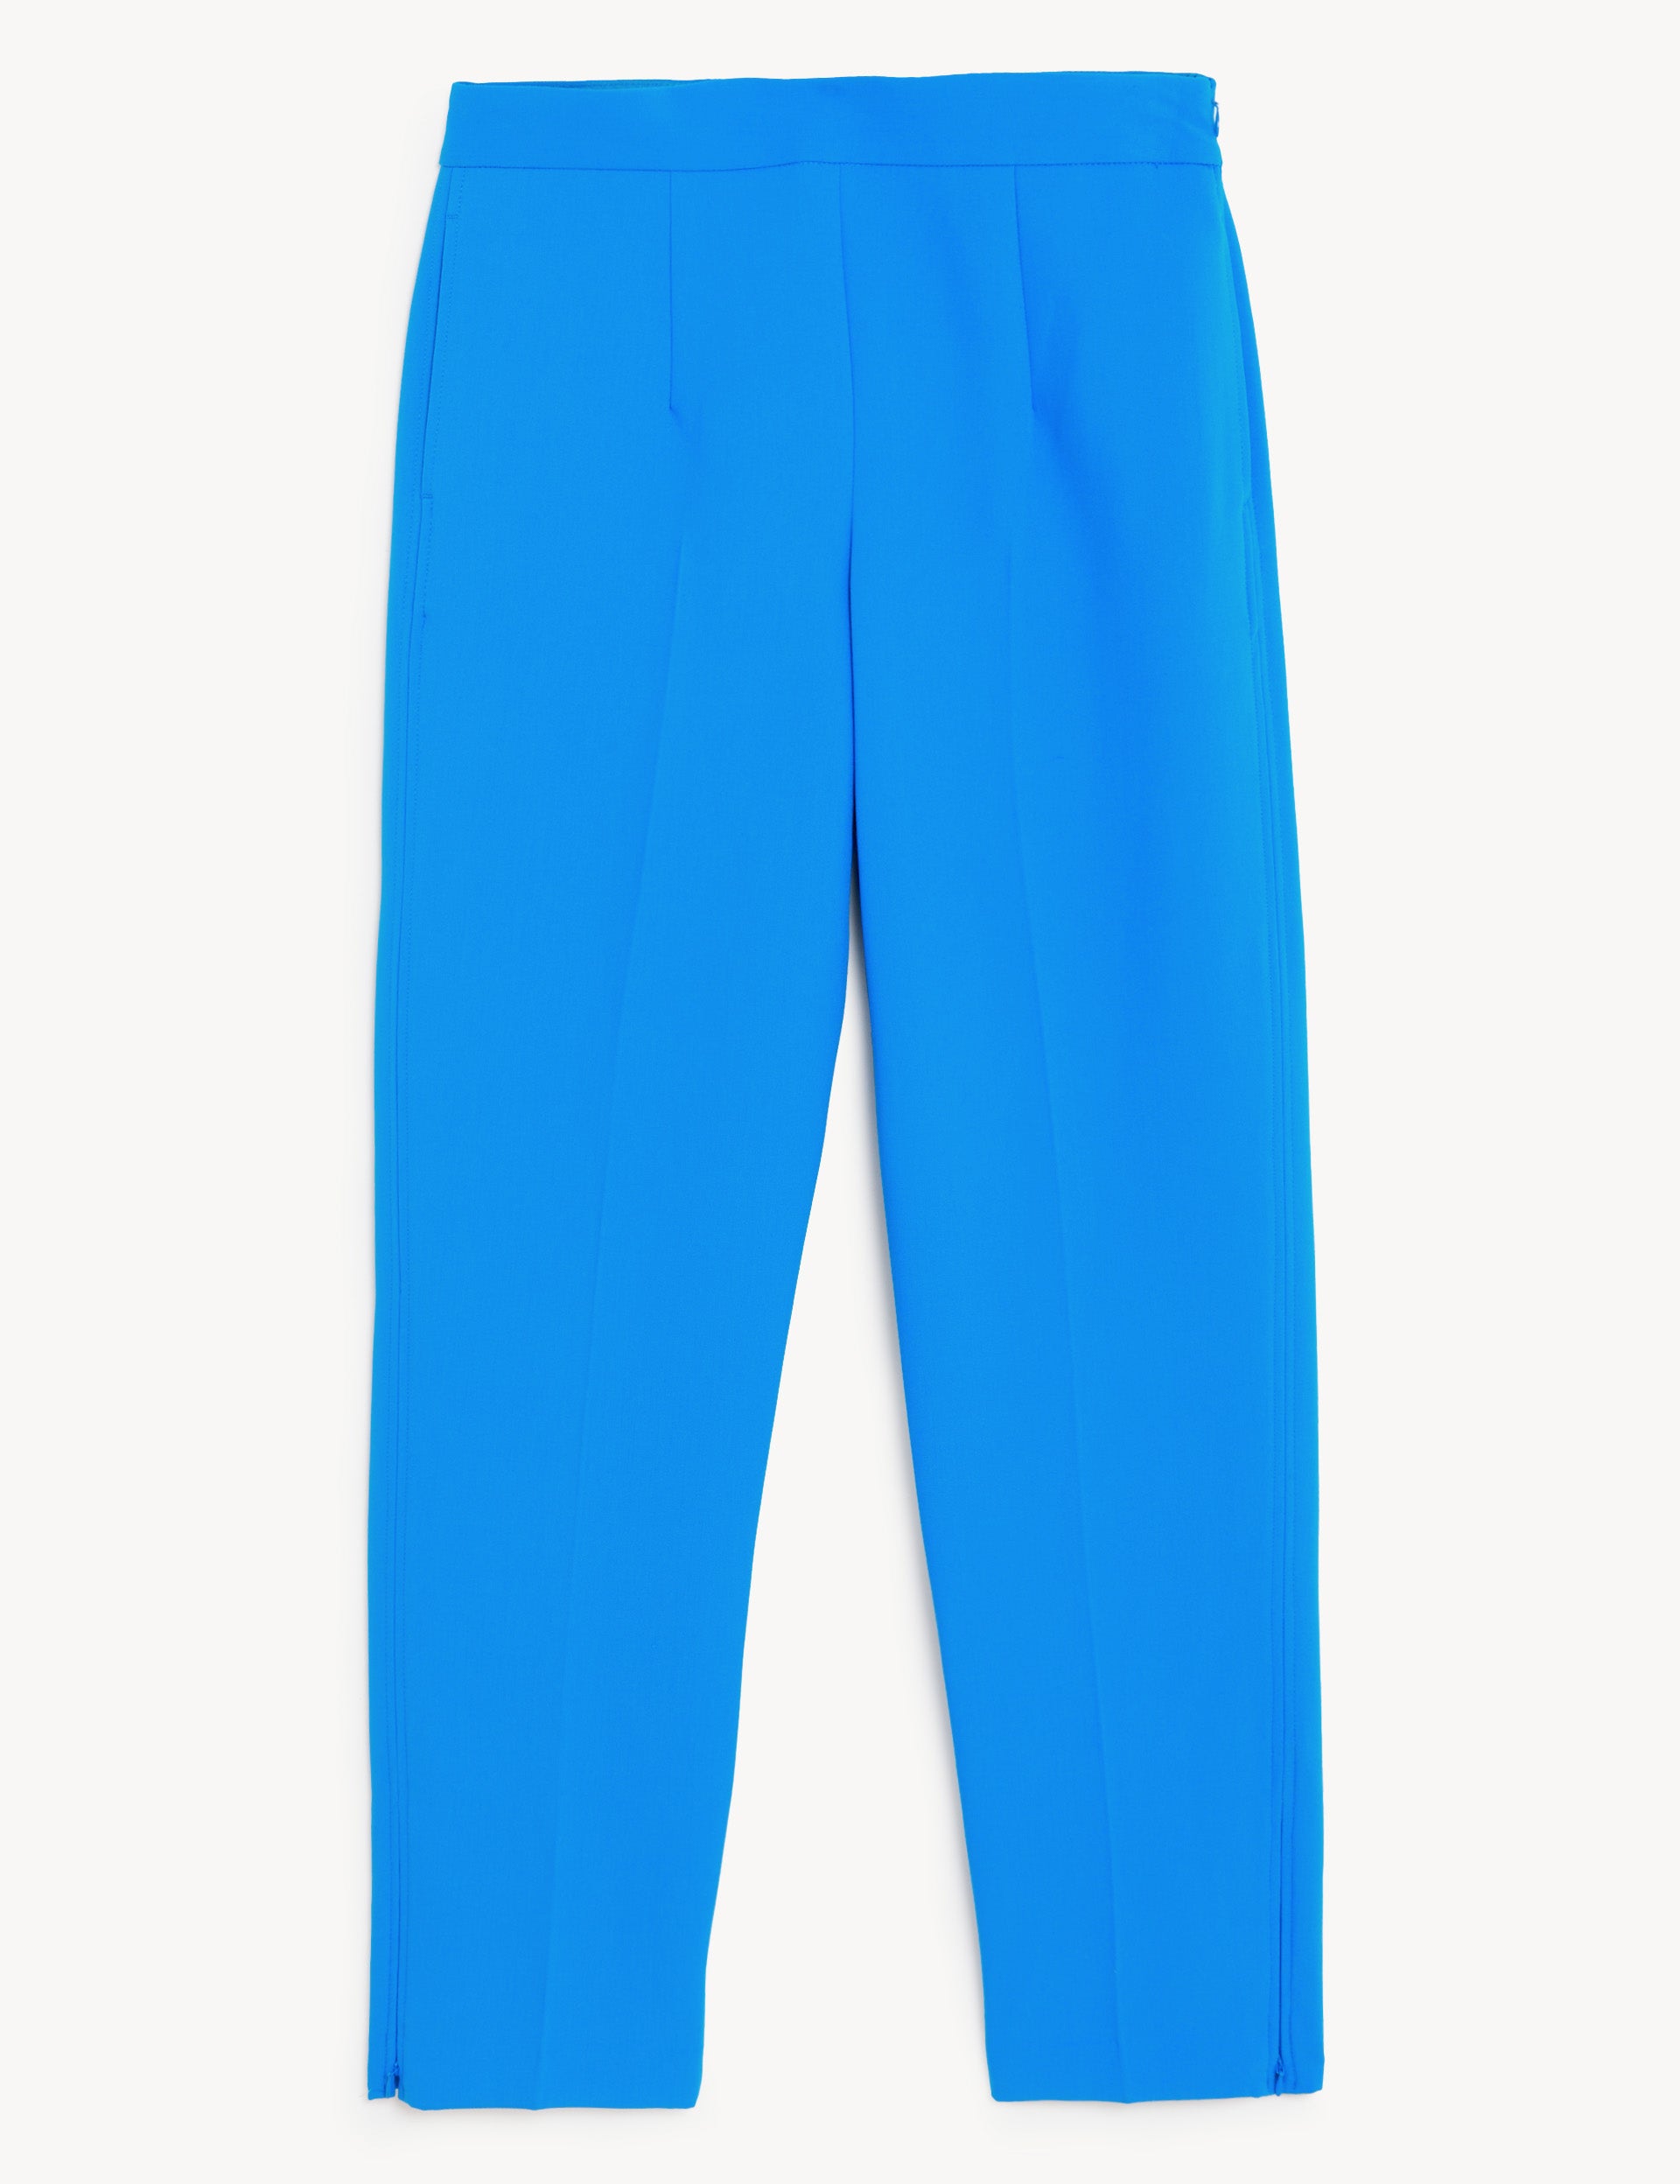 M&S Ultimate Straight Leg Suit in Electric Blue product image